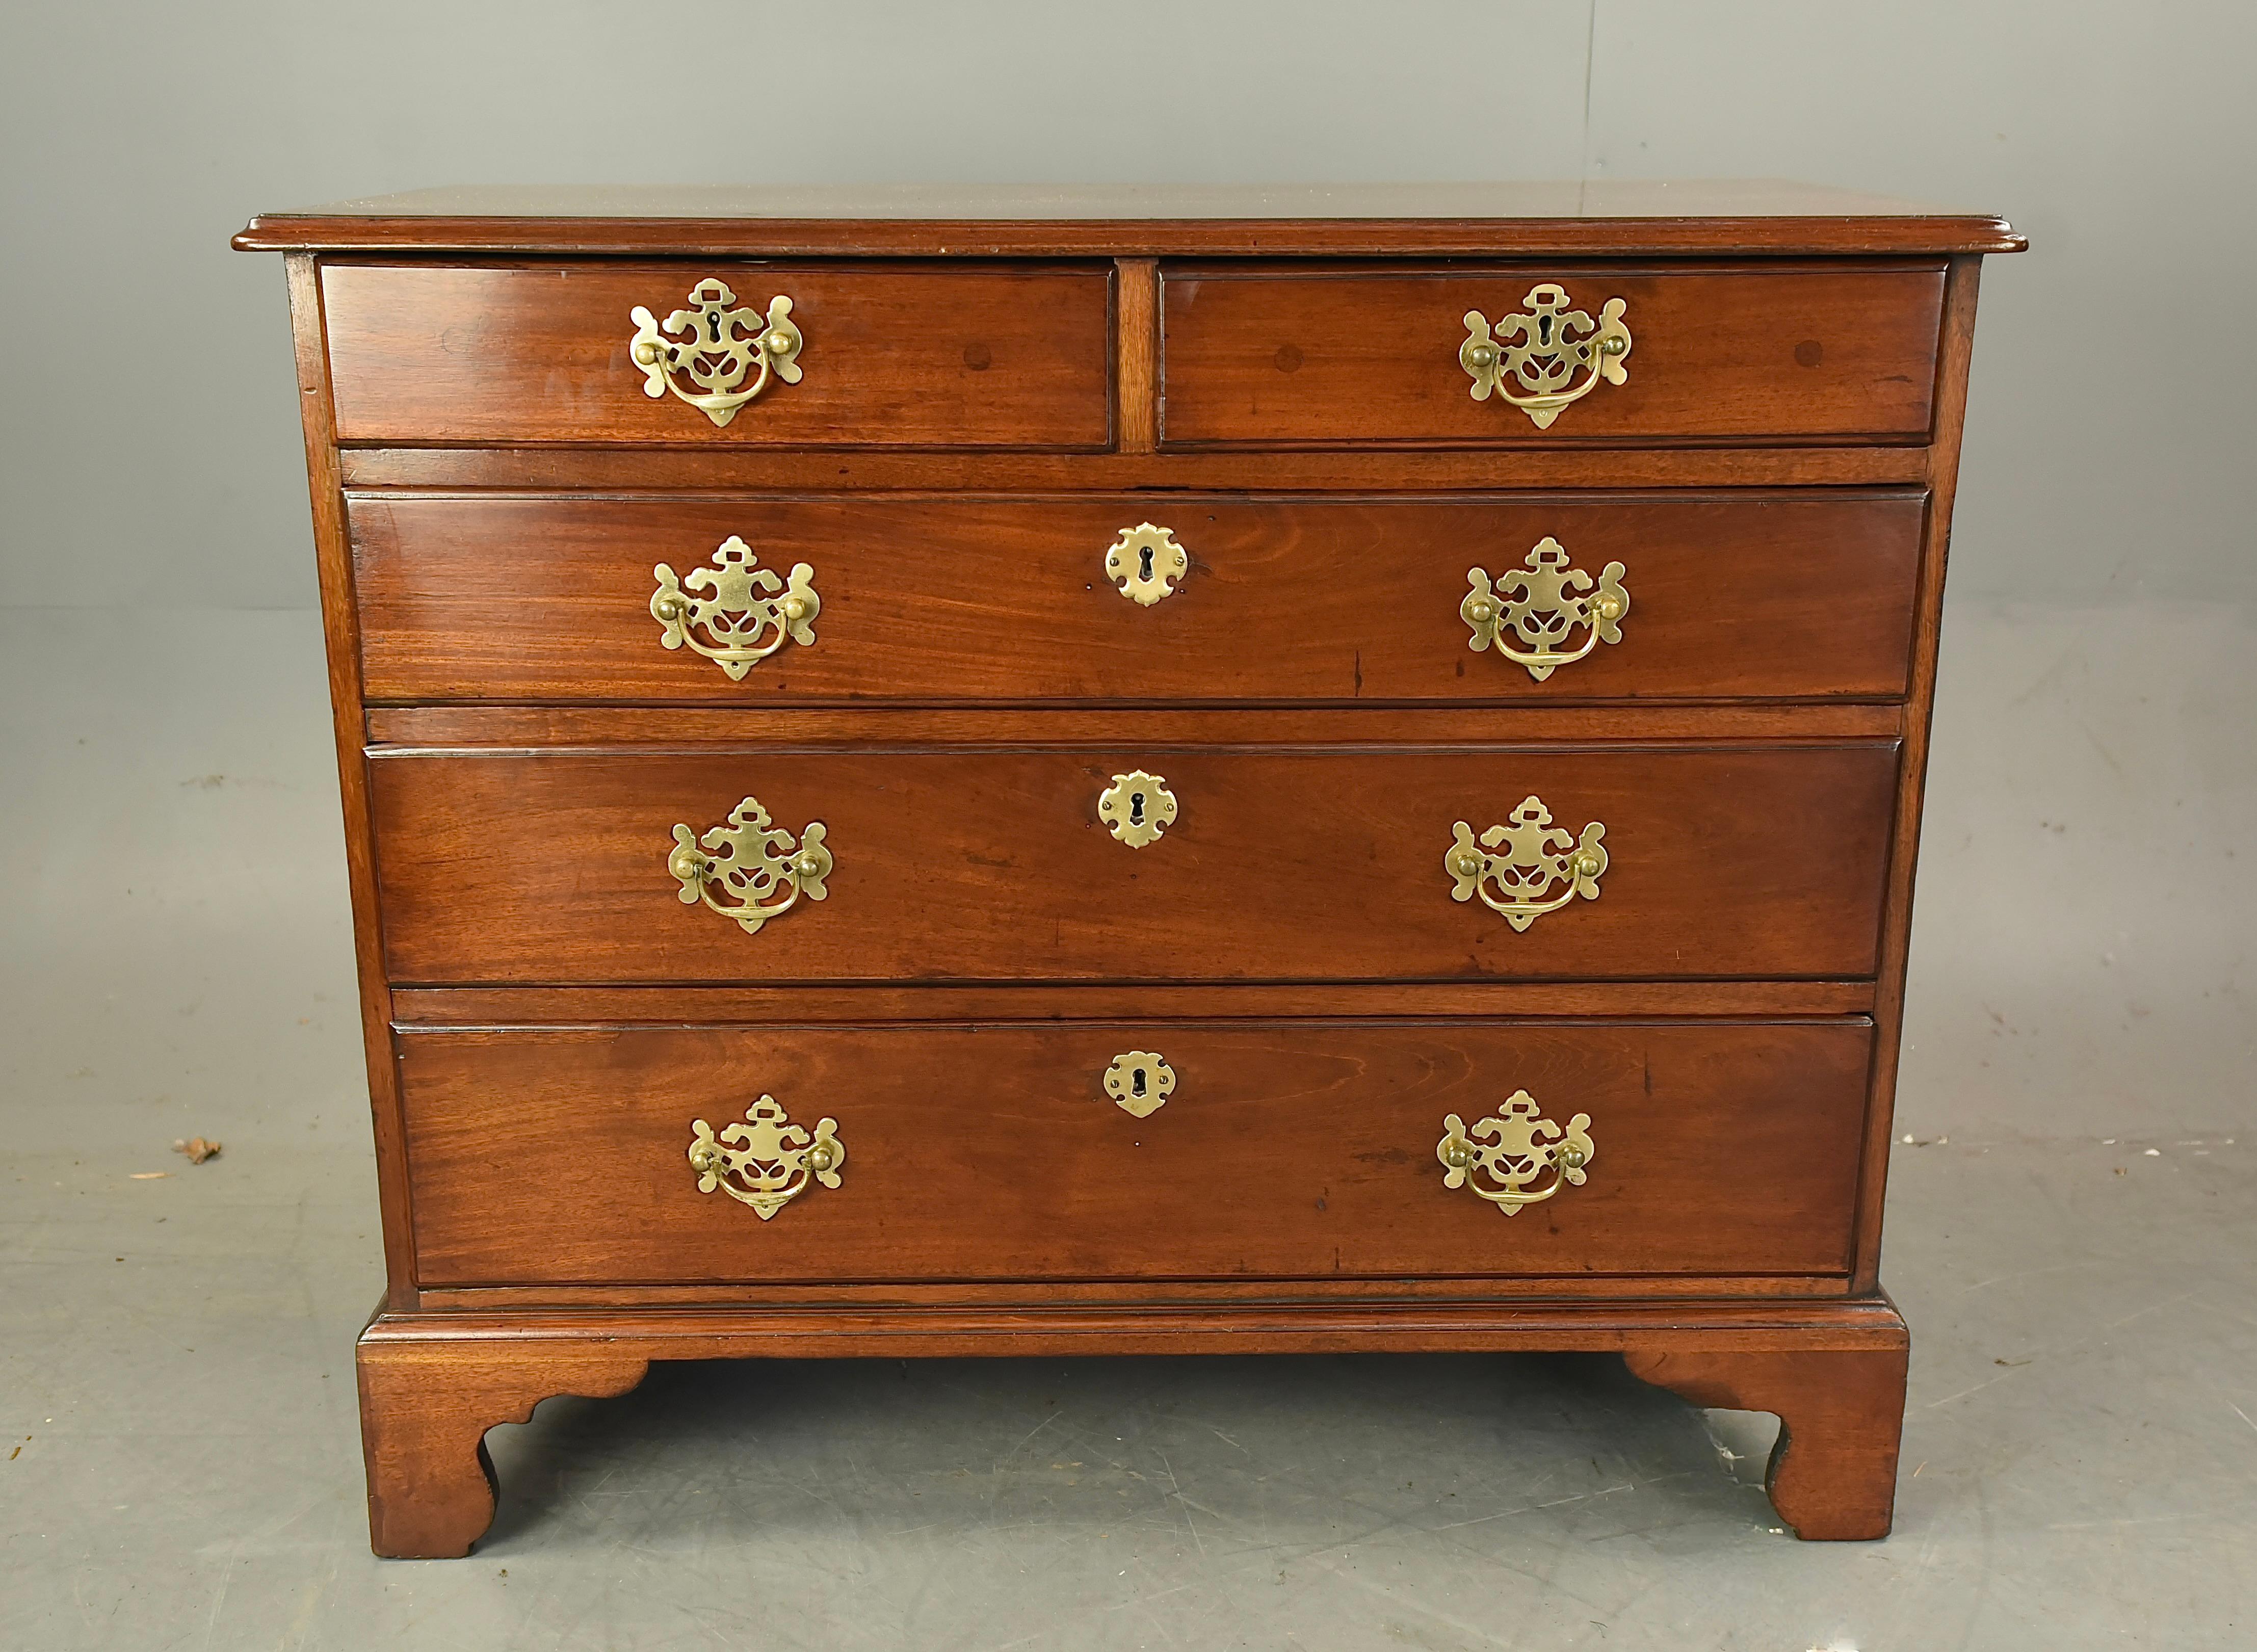 Good quality medium sized Georgian mahogany chest of drawers that has good oak lined drawers with front to back linings and fine hand cut dovetail joints .
All the drawers slide nice and smooth as they should. The chest is in great condition and has